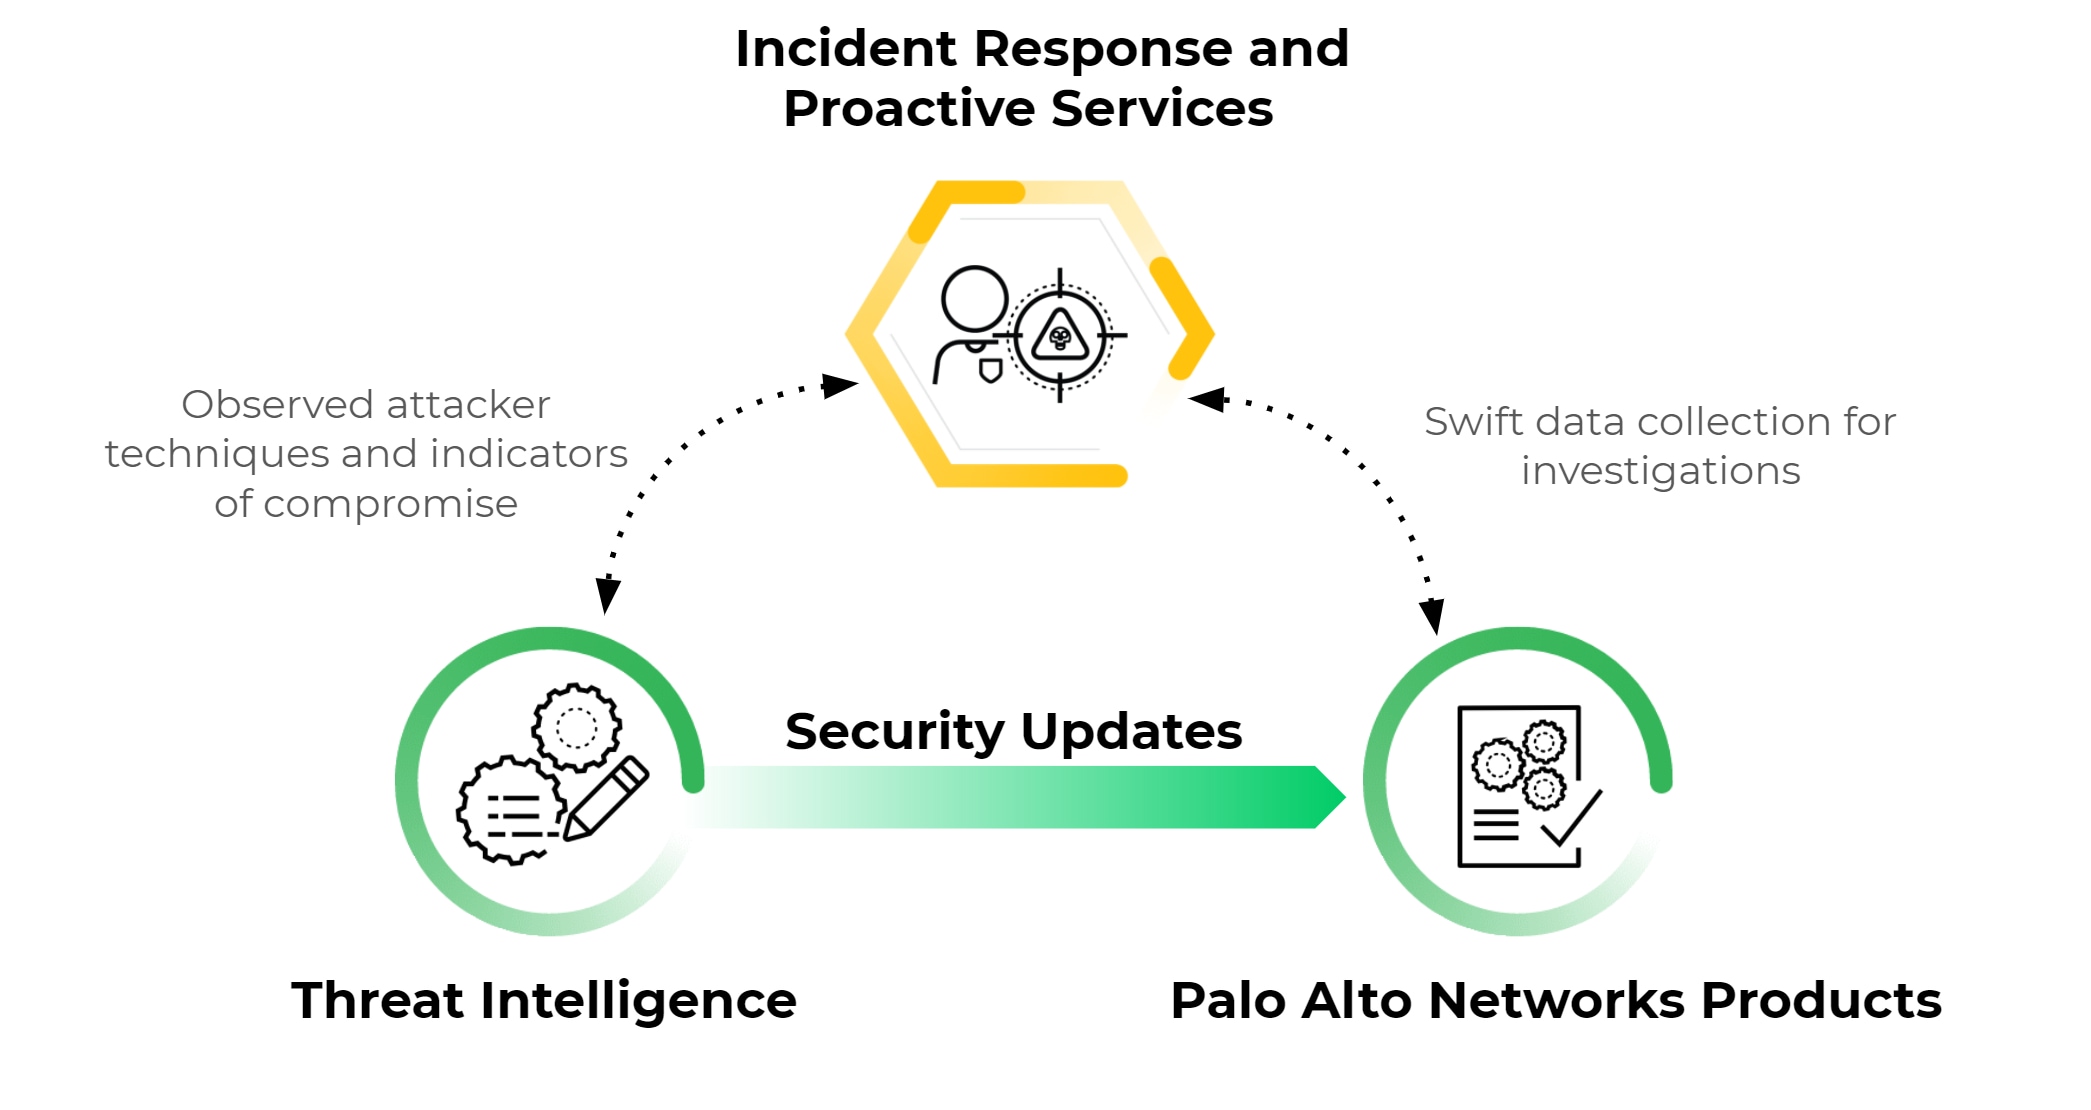 Threat intelligence and incident response and proactive services interact with Palo Alto Networks products, as shown in the image. This leads to prompt security updates, the sharing of observed attacker techniques and indicators of compromise, and swift data collection for investigations. 